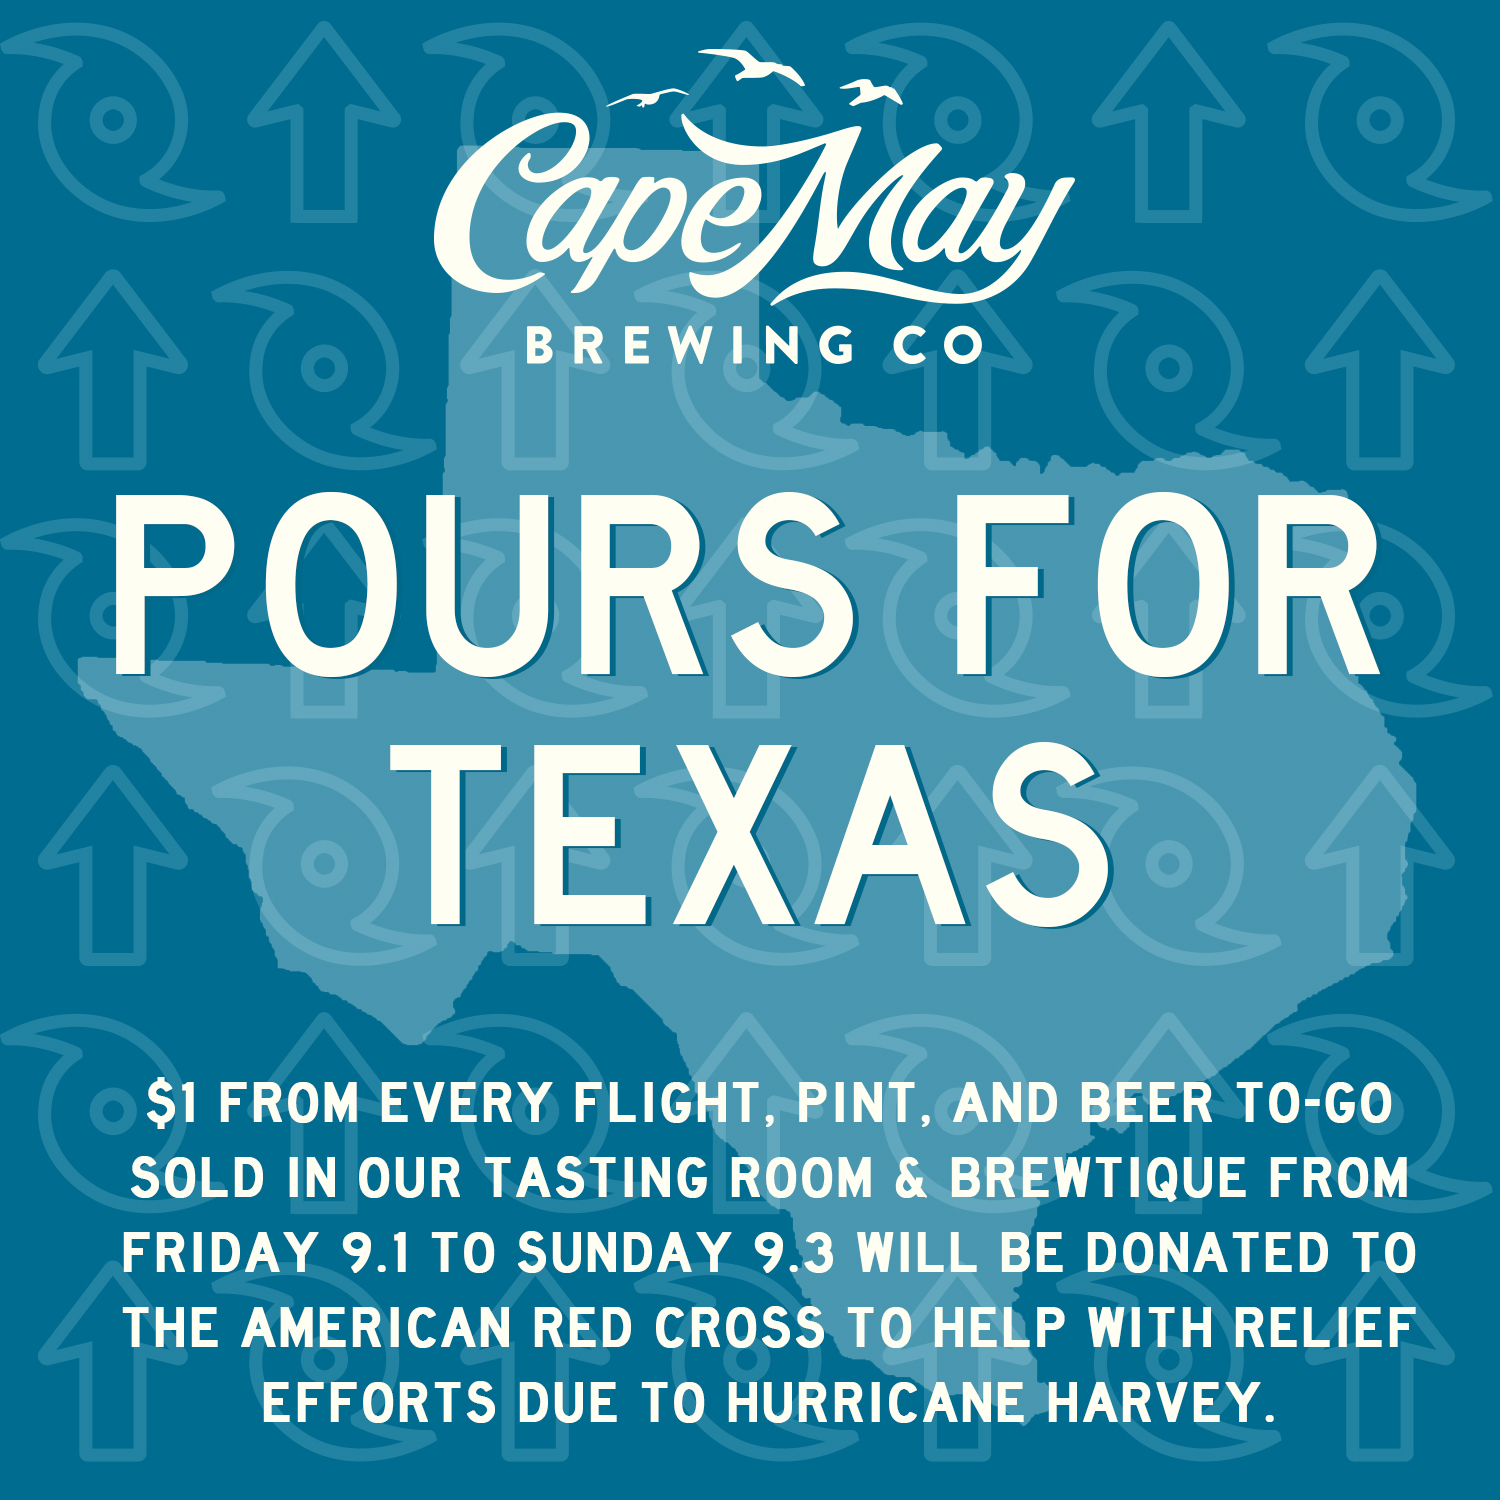 cape may brewing harvey relief